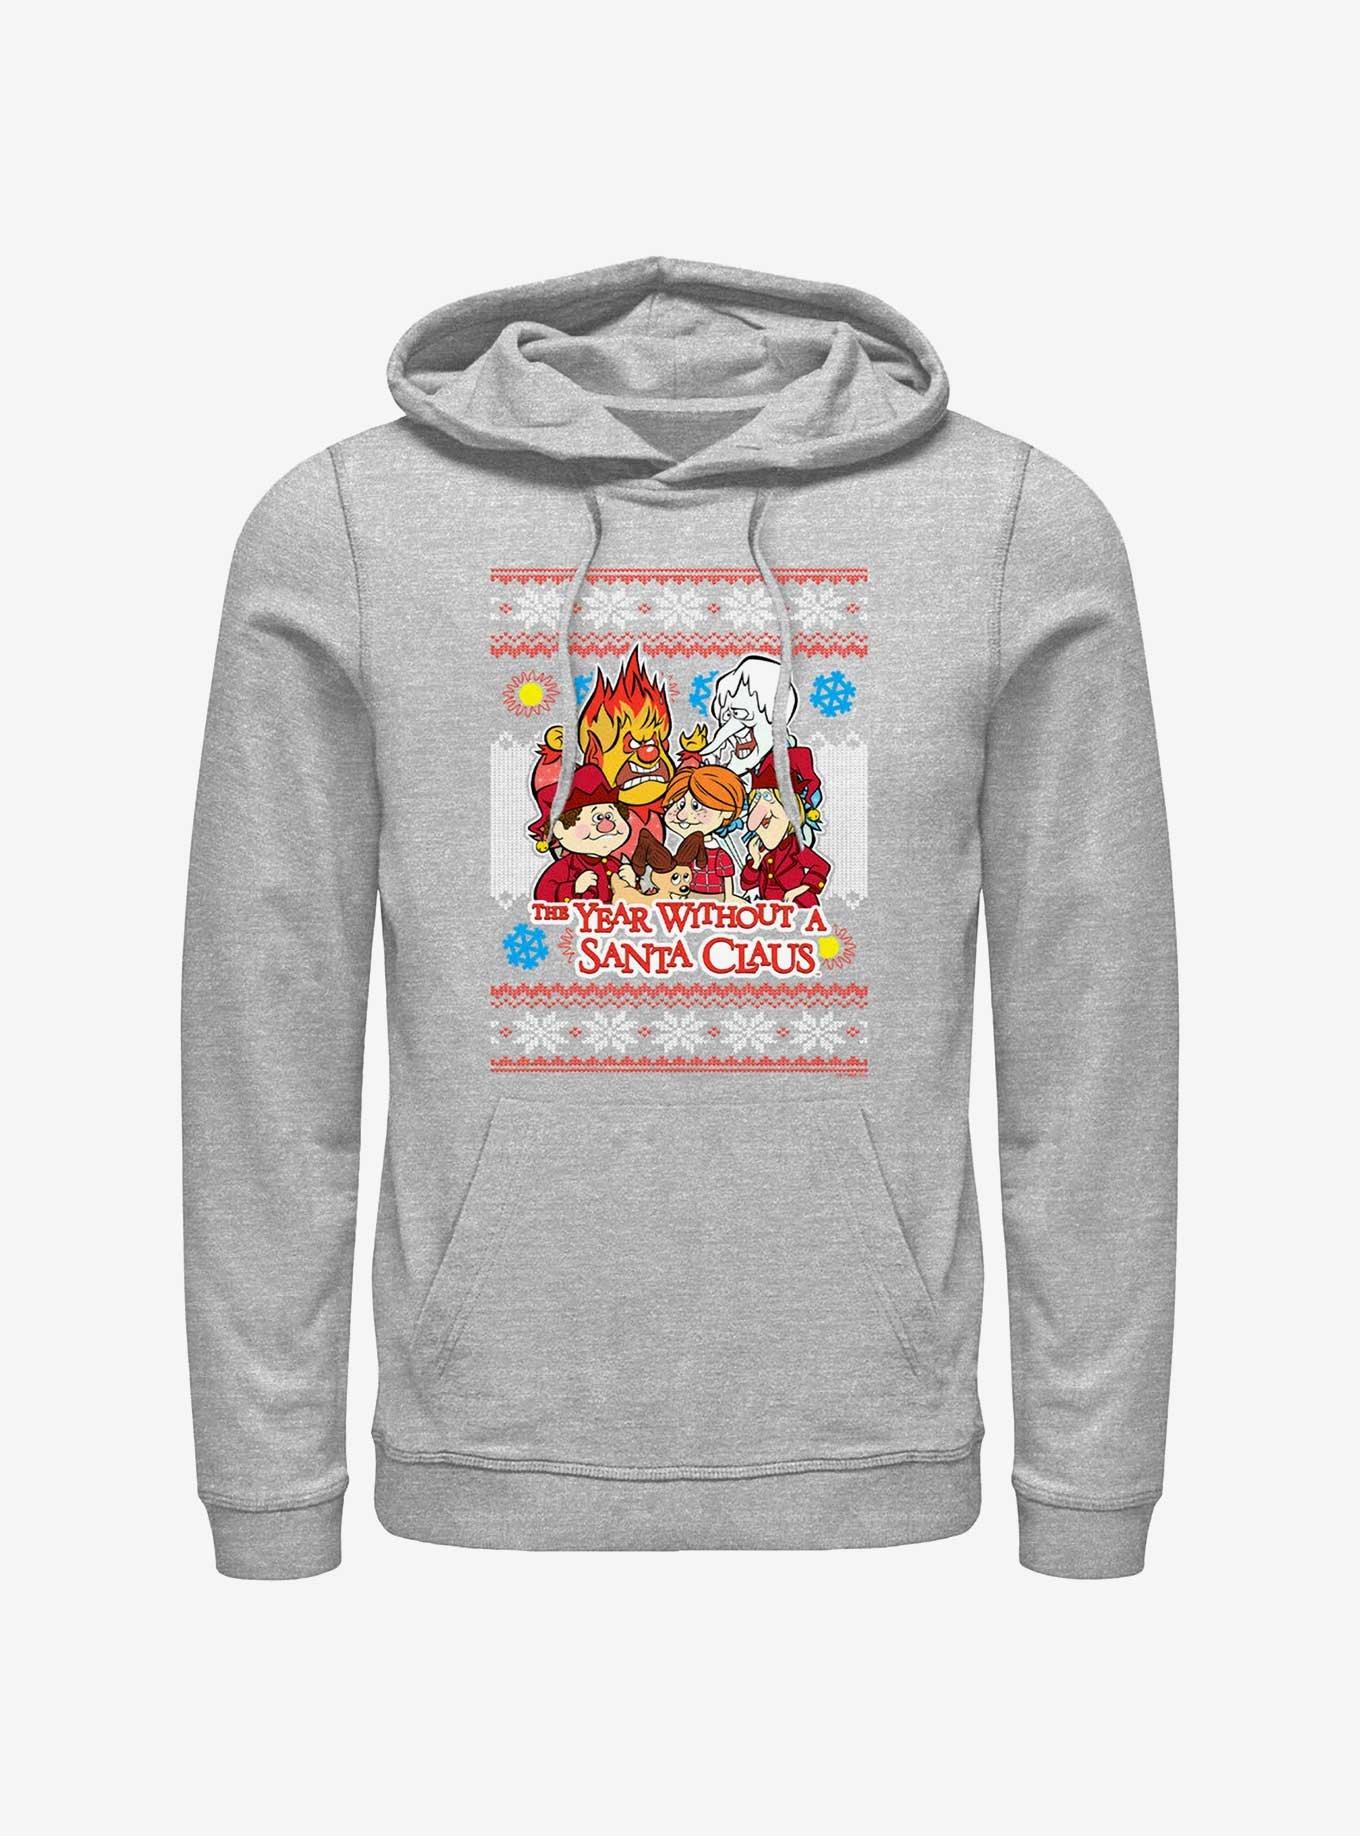 The Year Without a Santa Claus Christmas Gang Ugly Hoodie